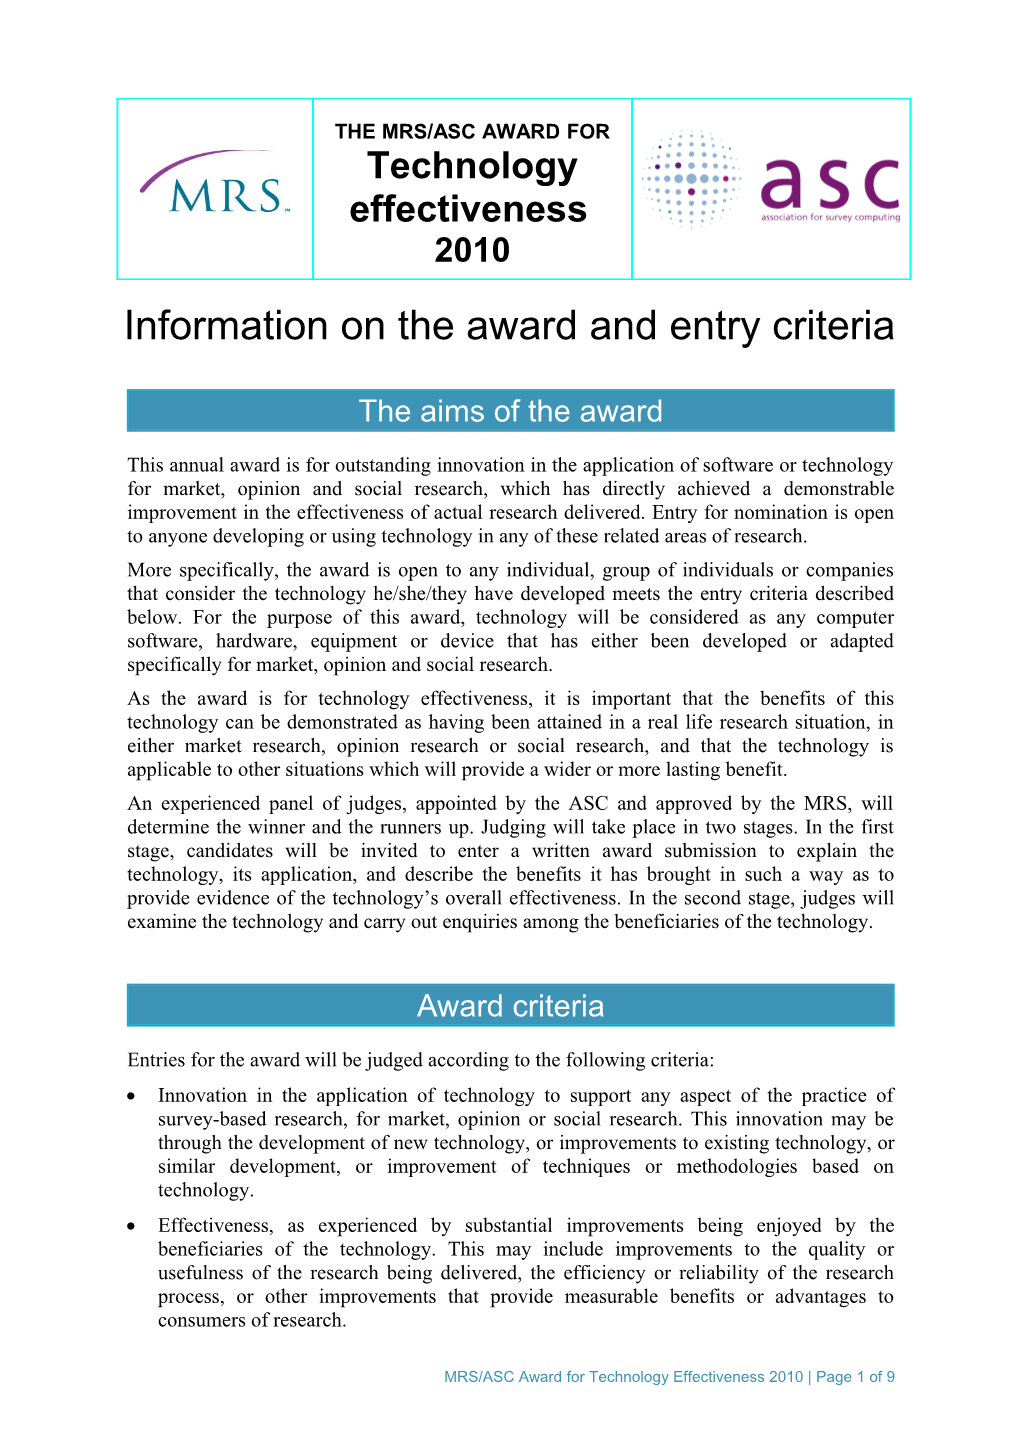 Information on the Award and Entry Criteria